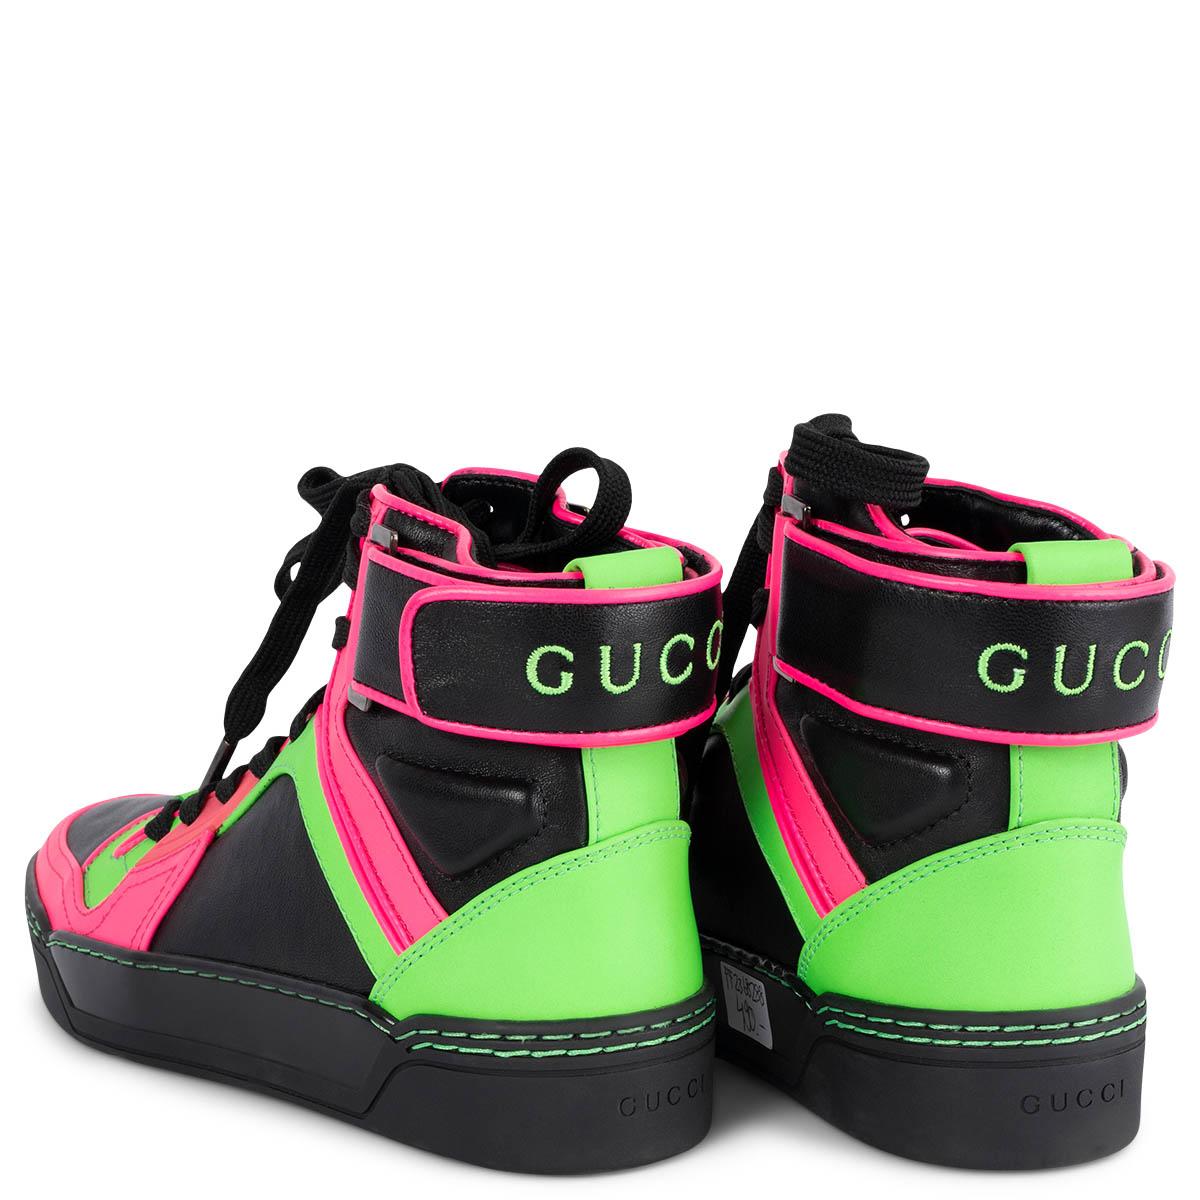 GUCCI neon & black NEW BASKETBALL High Top Sneakers Shoes 35.5 For Sale 2